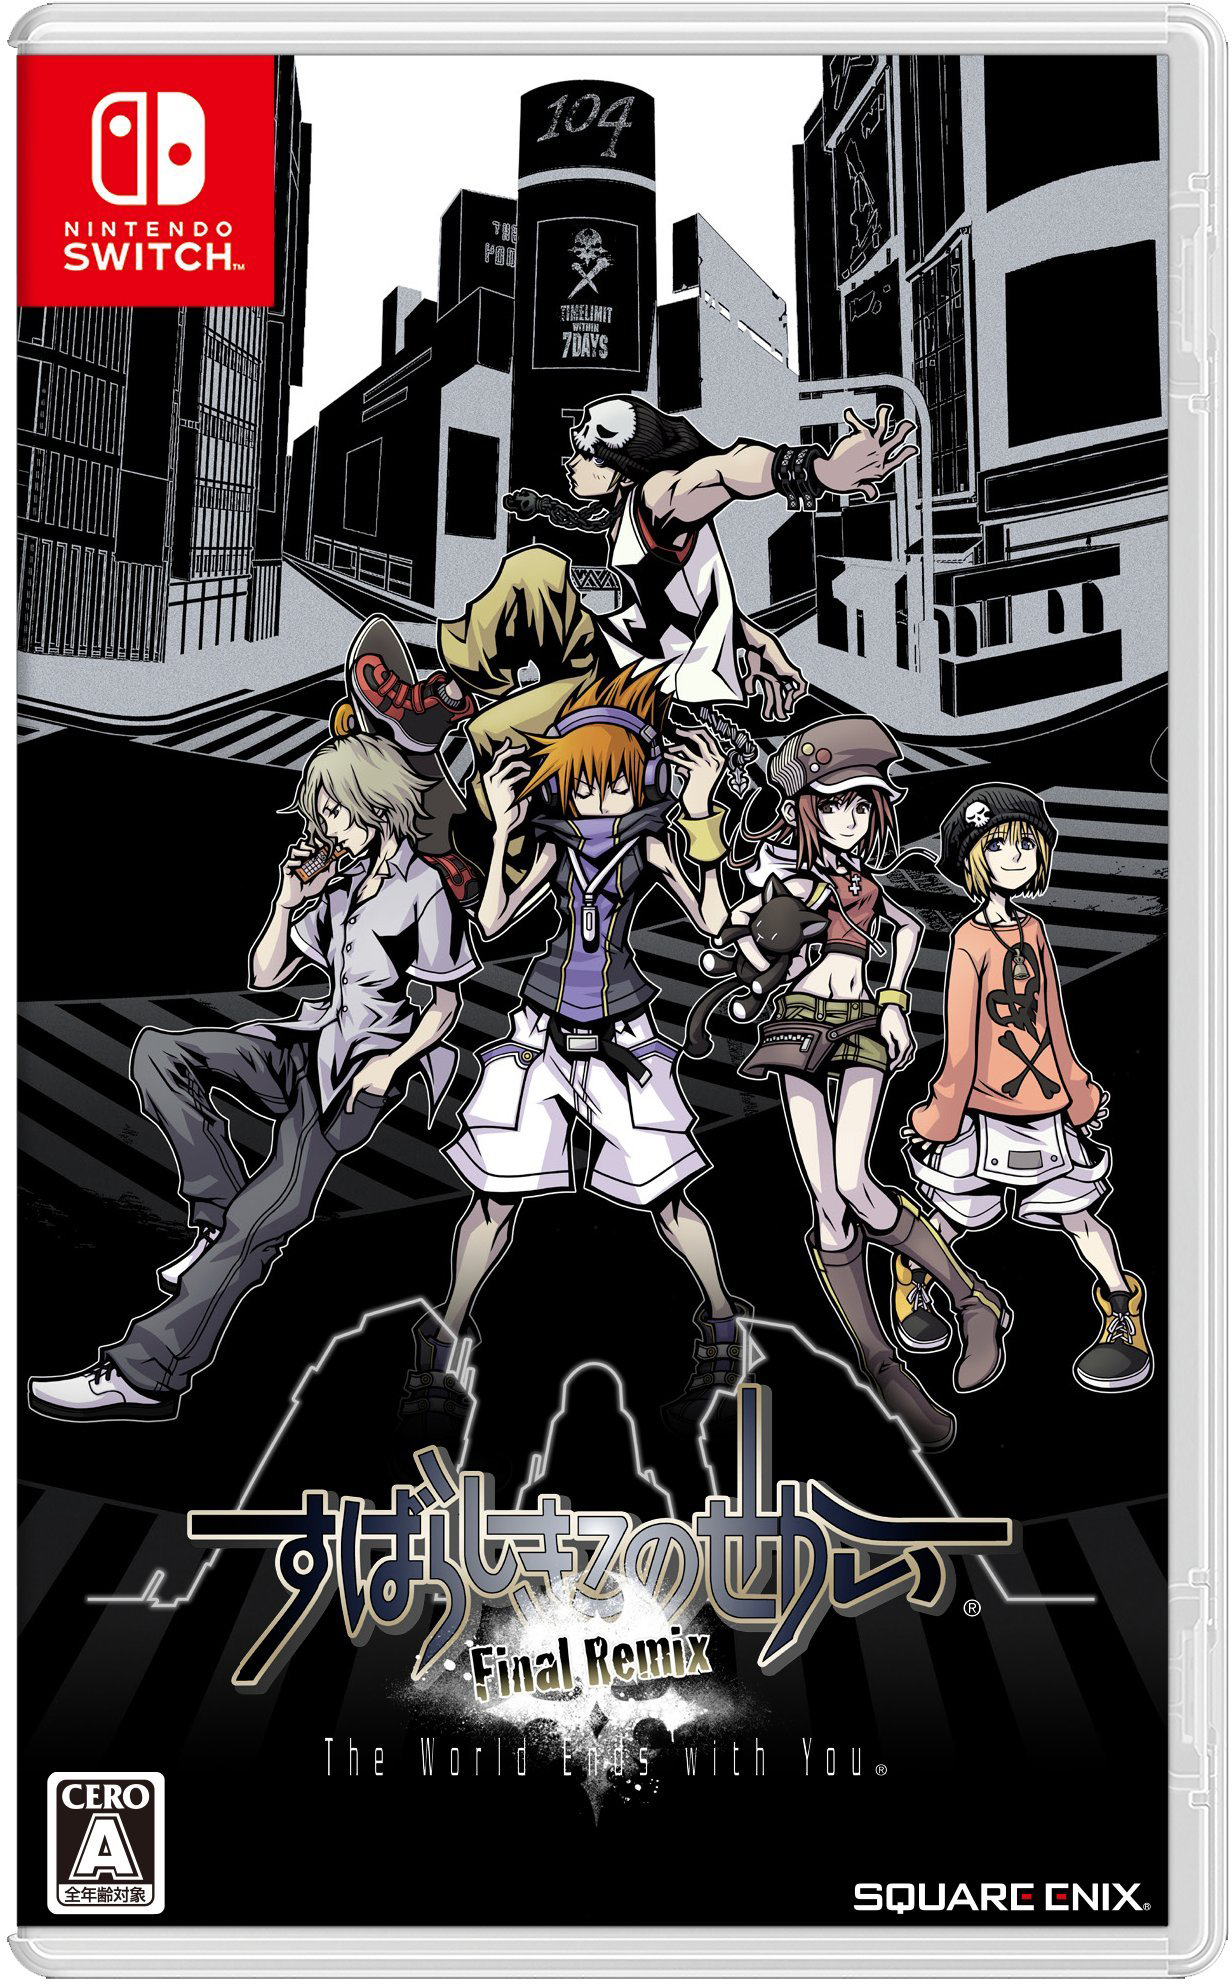 Nintendo Switch JP - The World Ends with You Final Remix.jpg